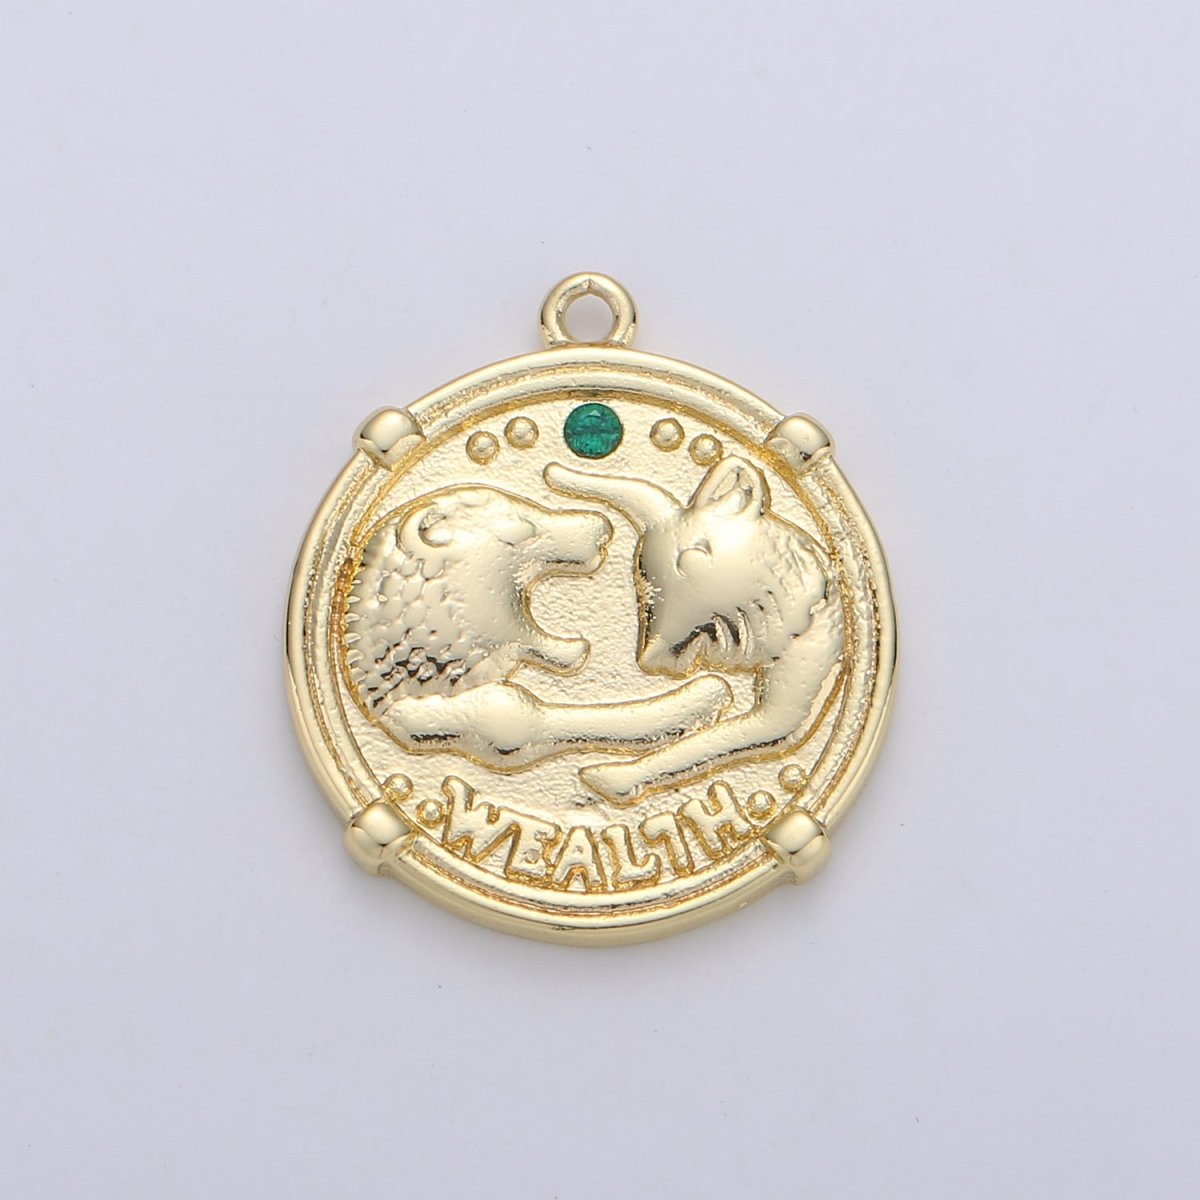 Good Luck charm "Wealth" Rustic Coin Gold Filled Charm with Green Crystal C-930 - DLUXCA